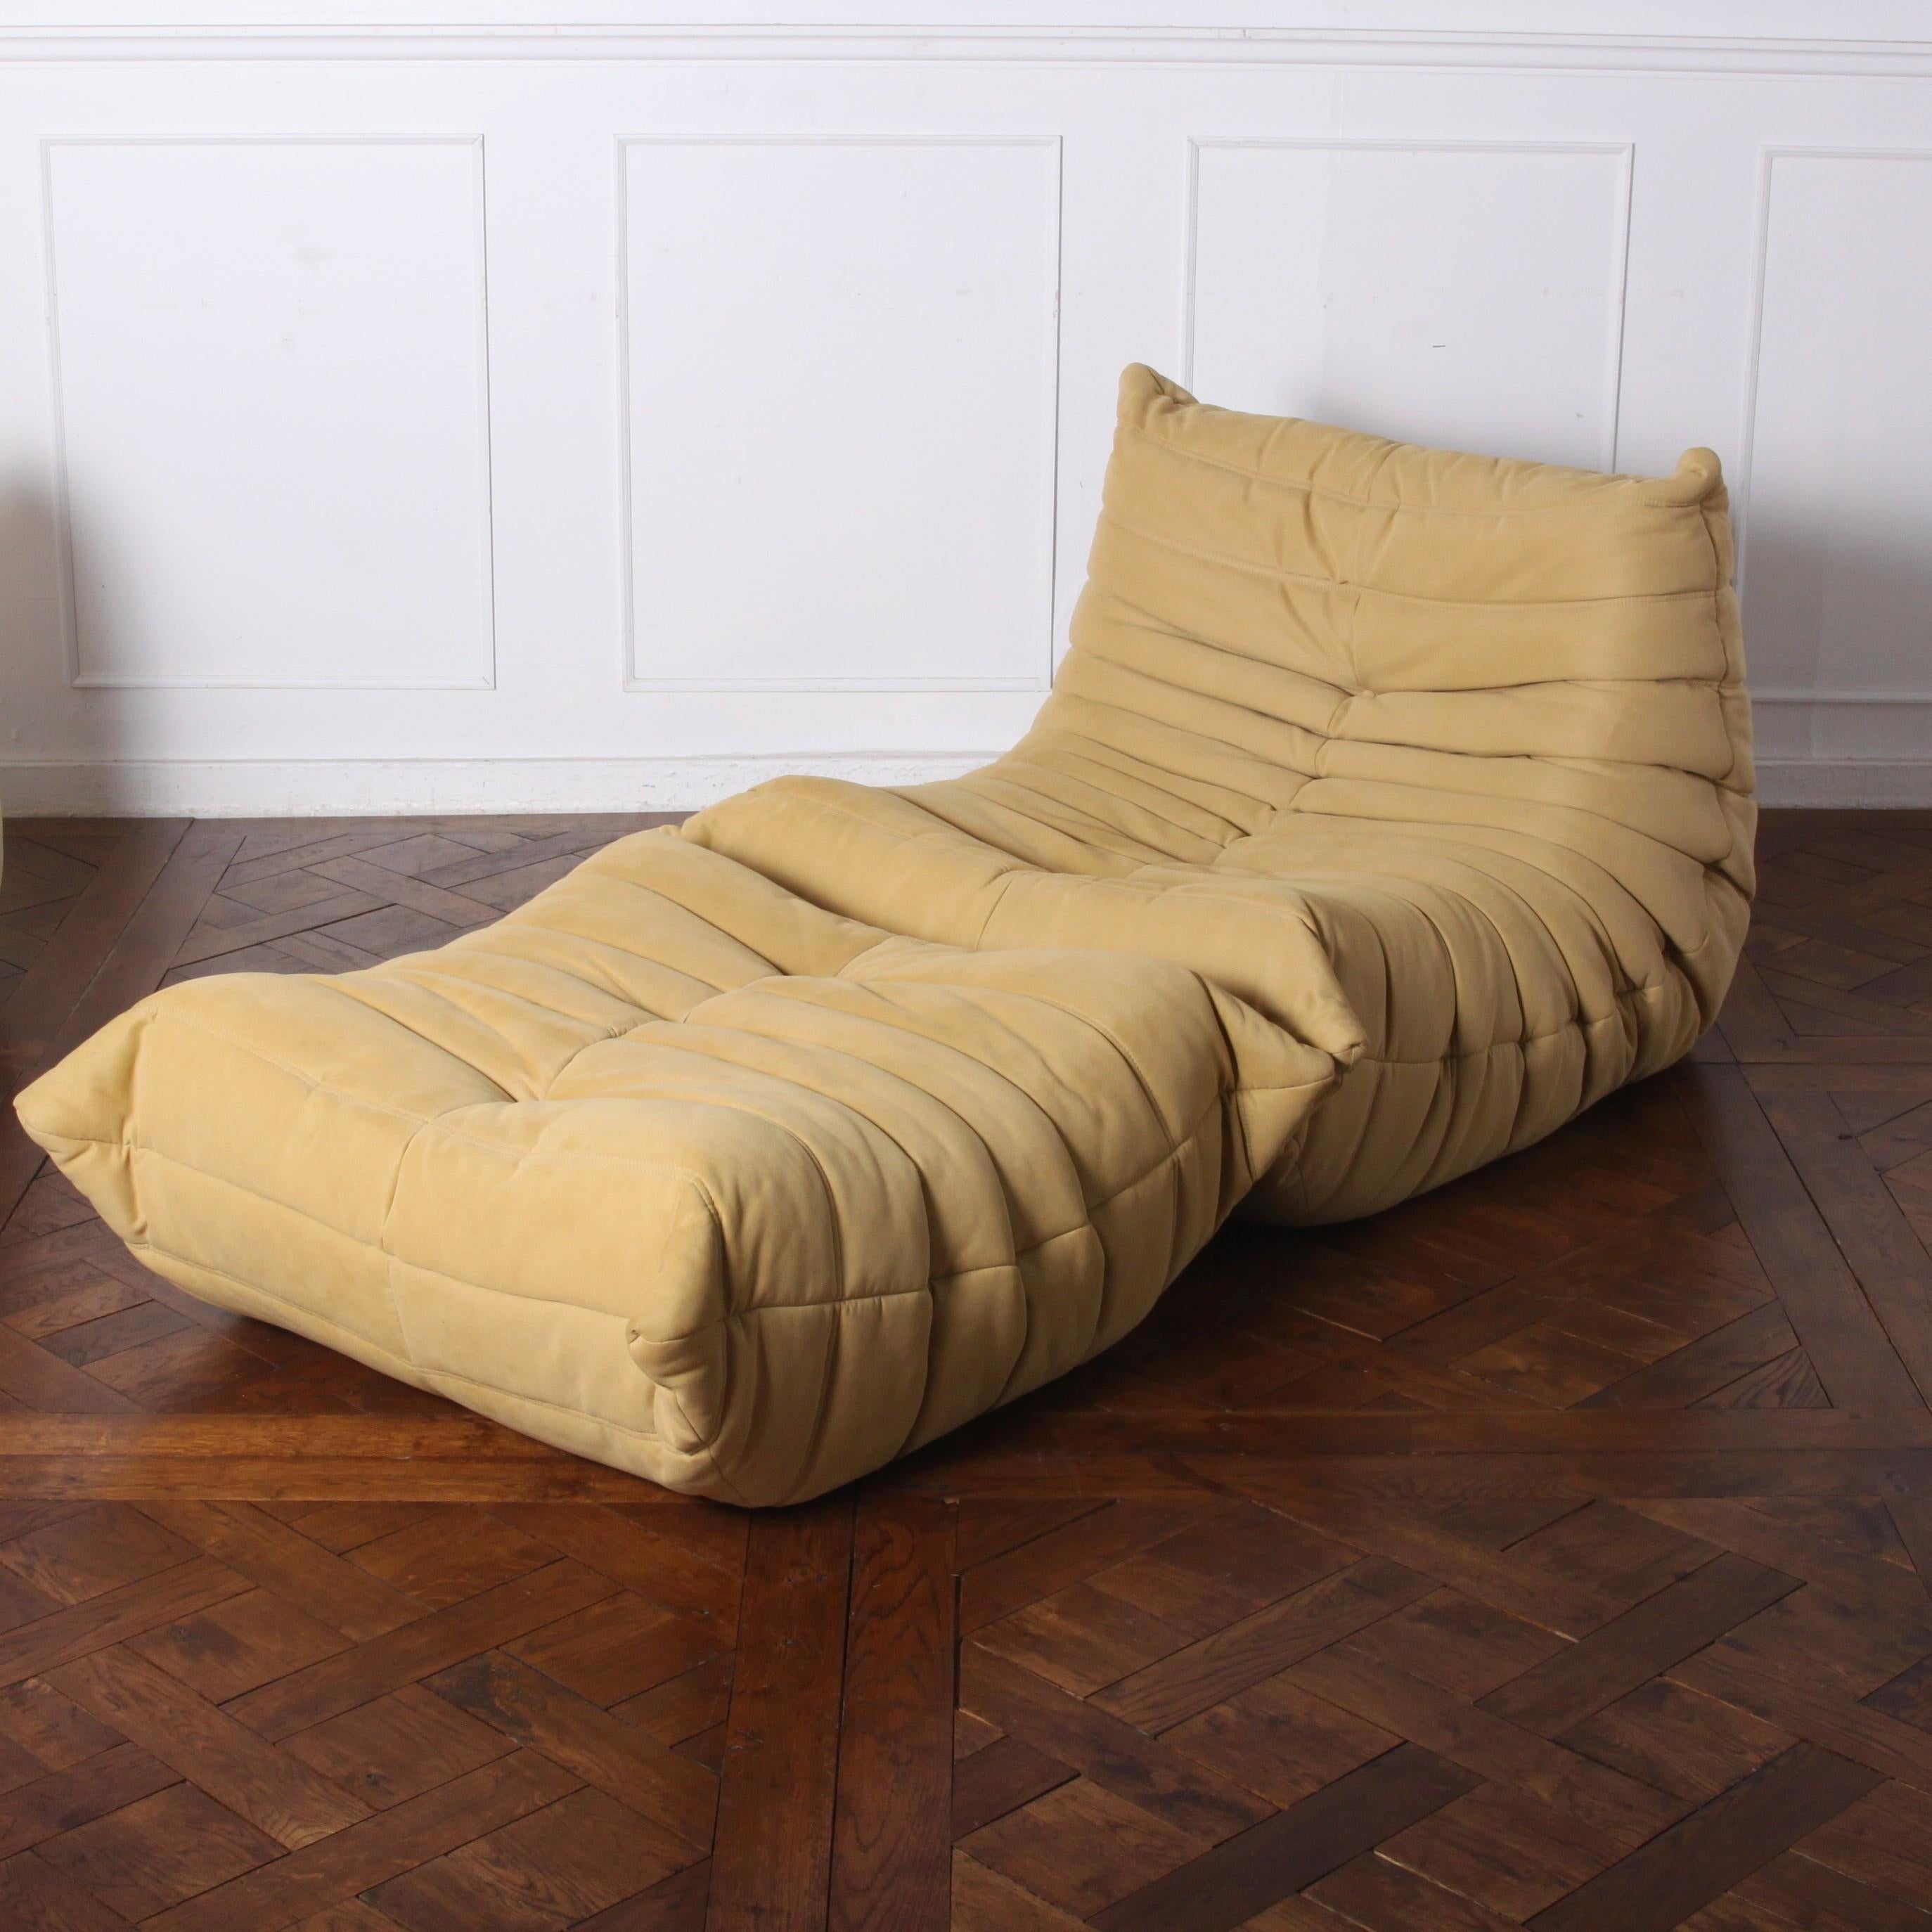 Fabric 'Togo' Sofa Suite by Michel Ducaroy for Ligne Roset